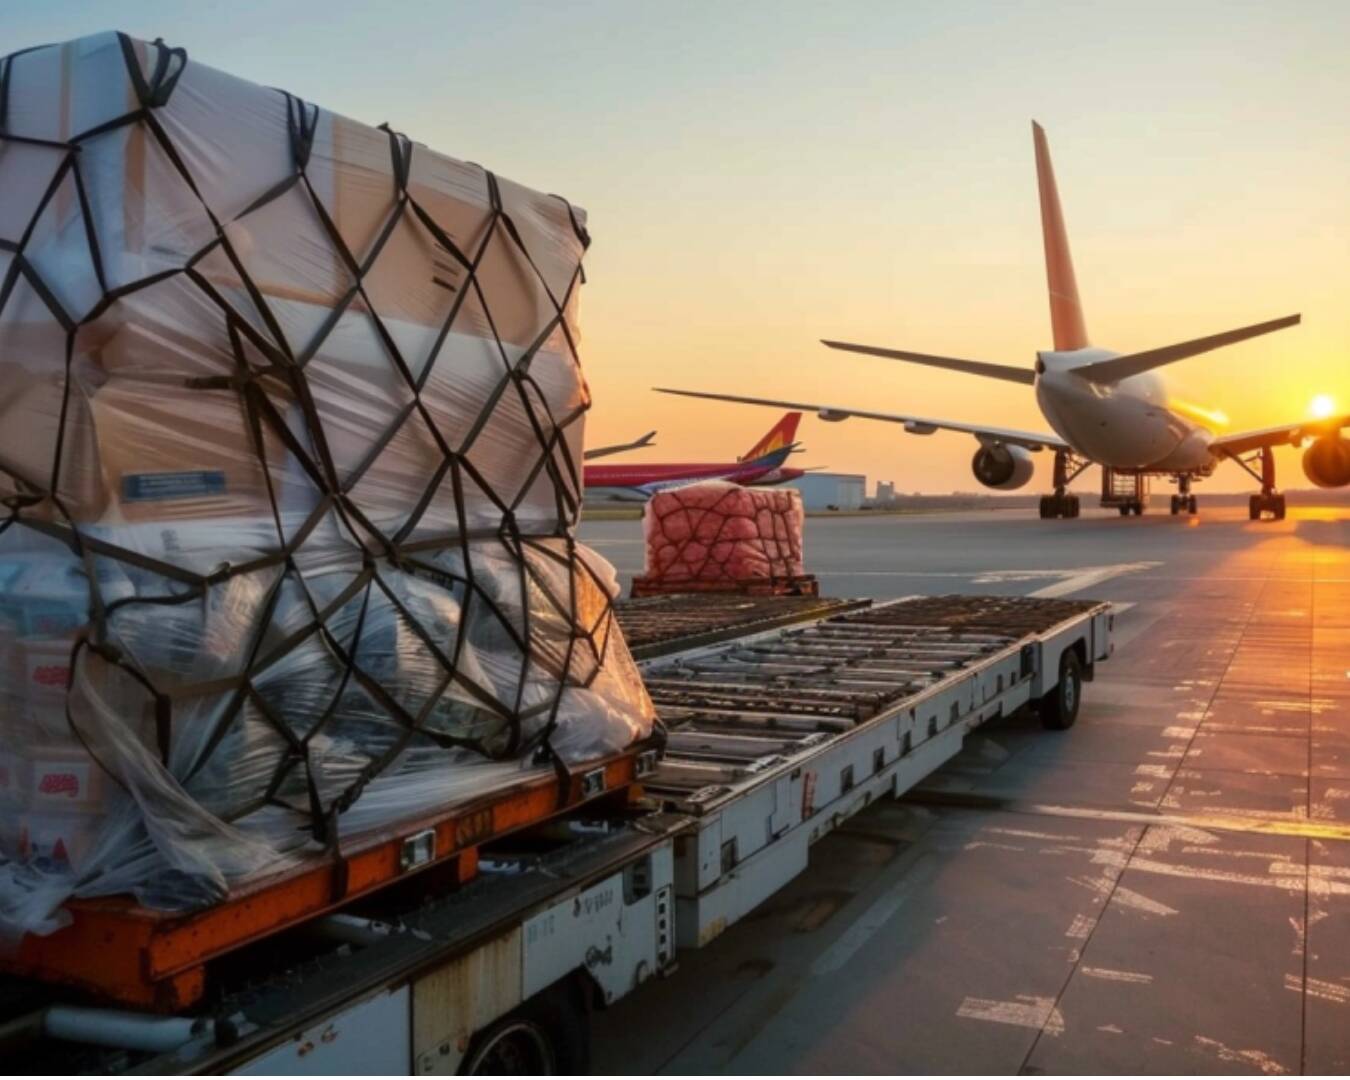 Stacks of cargo, wrapped in protective plastic and secured with netting, are loaded onto a trolley at an airport as the sun sets. An airplane, poised for the air freight industry, is parked nearby on the tarmac, ready for departure. Airport personnel and vehicles are visible in the background.